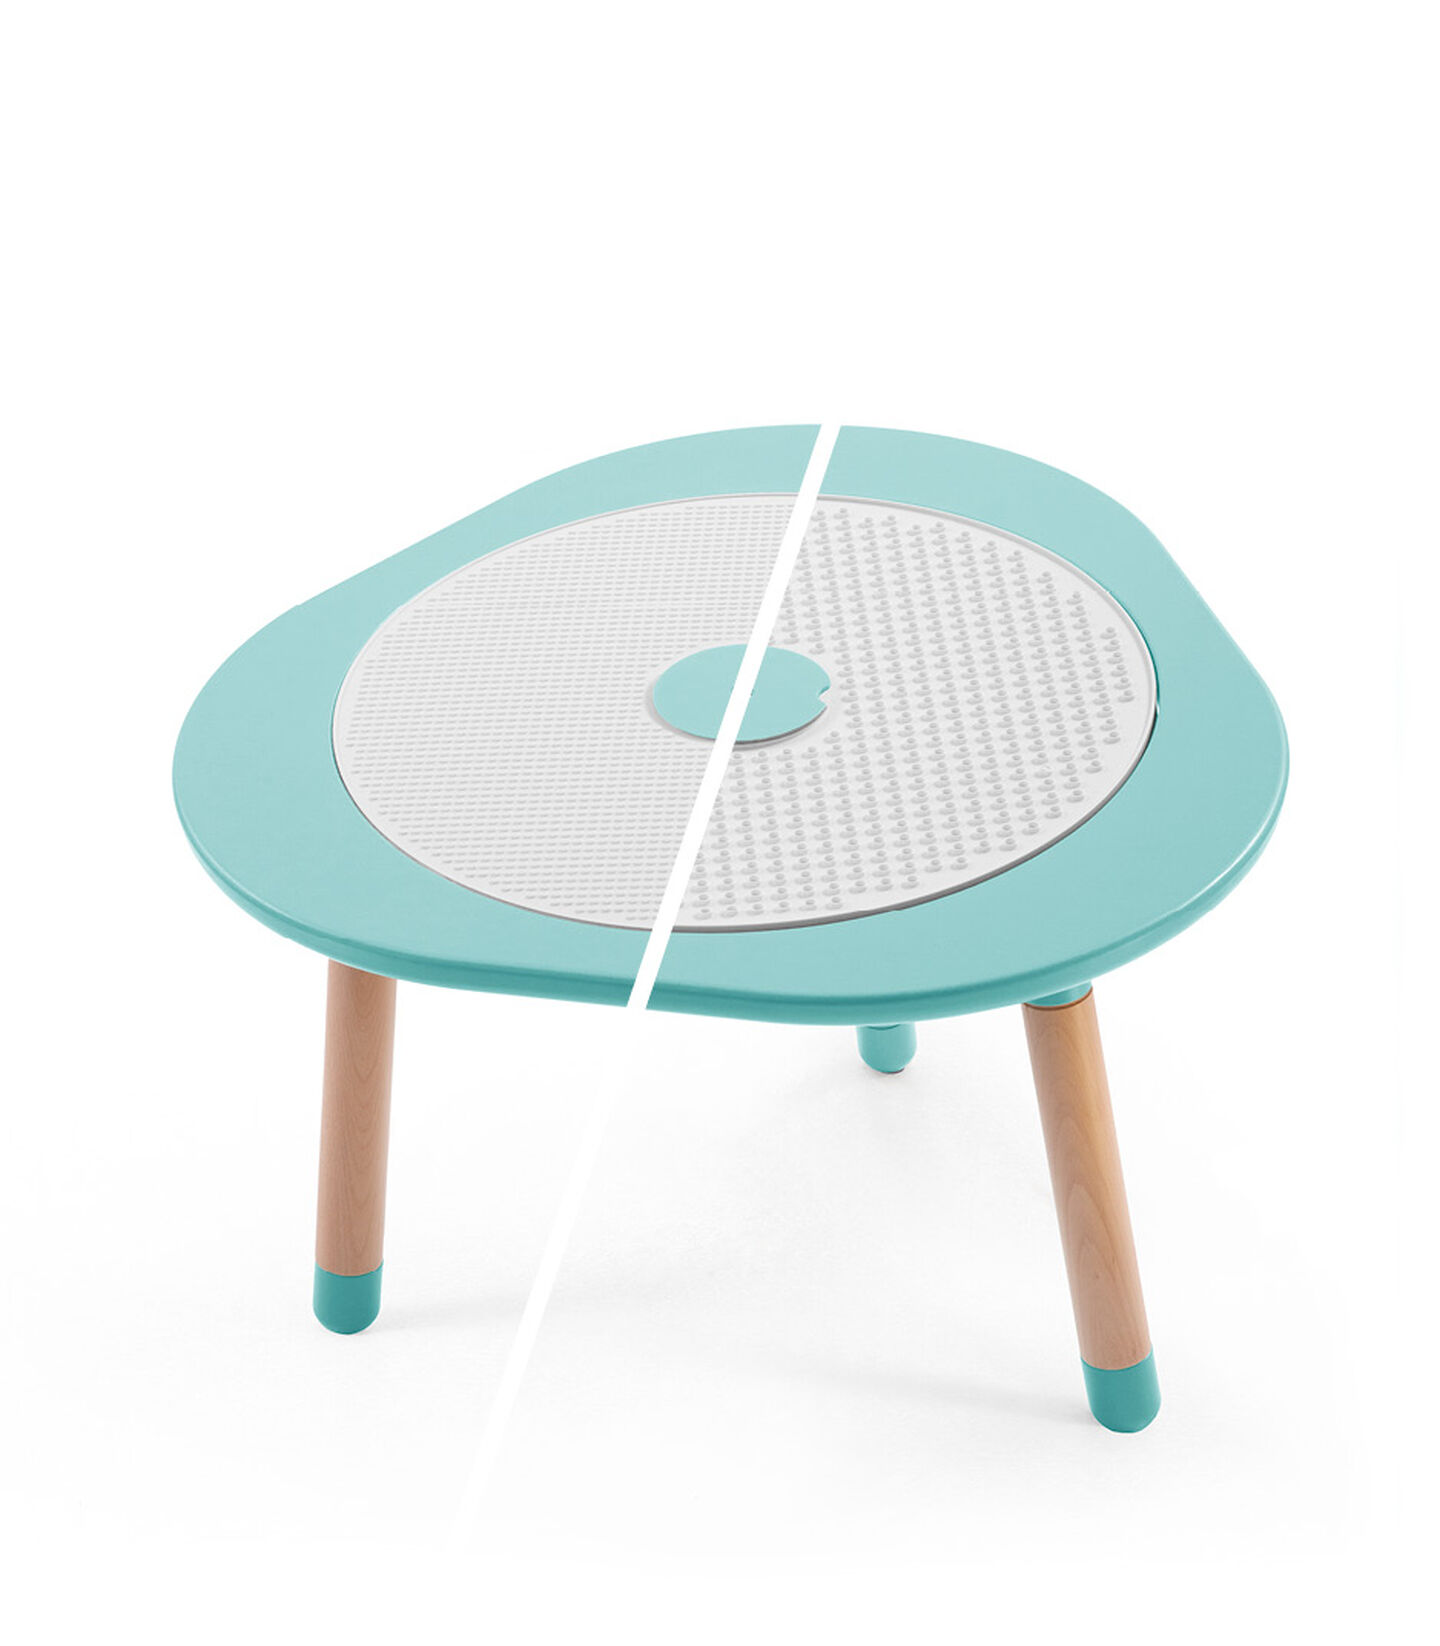 Stokke® MuTable™ in Mint, Mint, mainview view 3